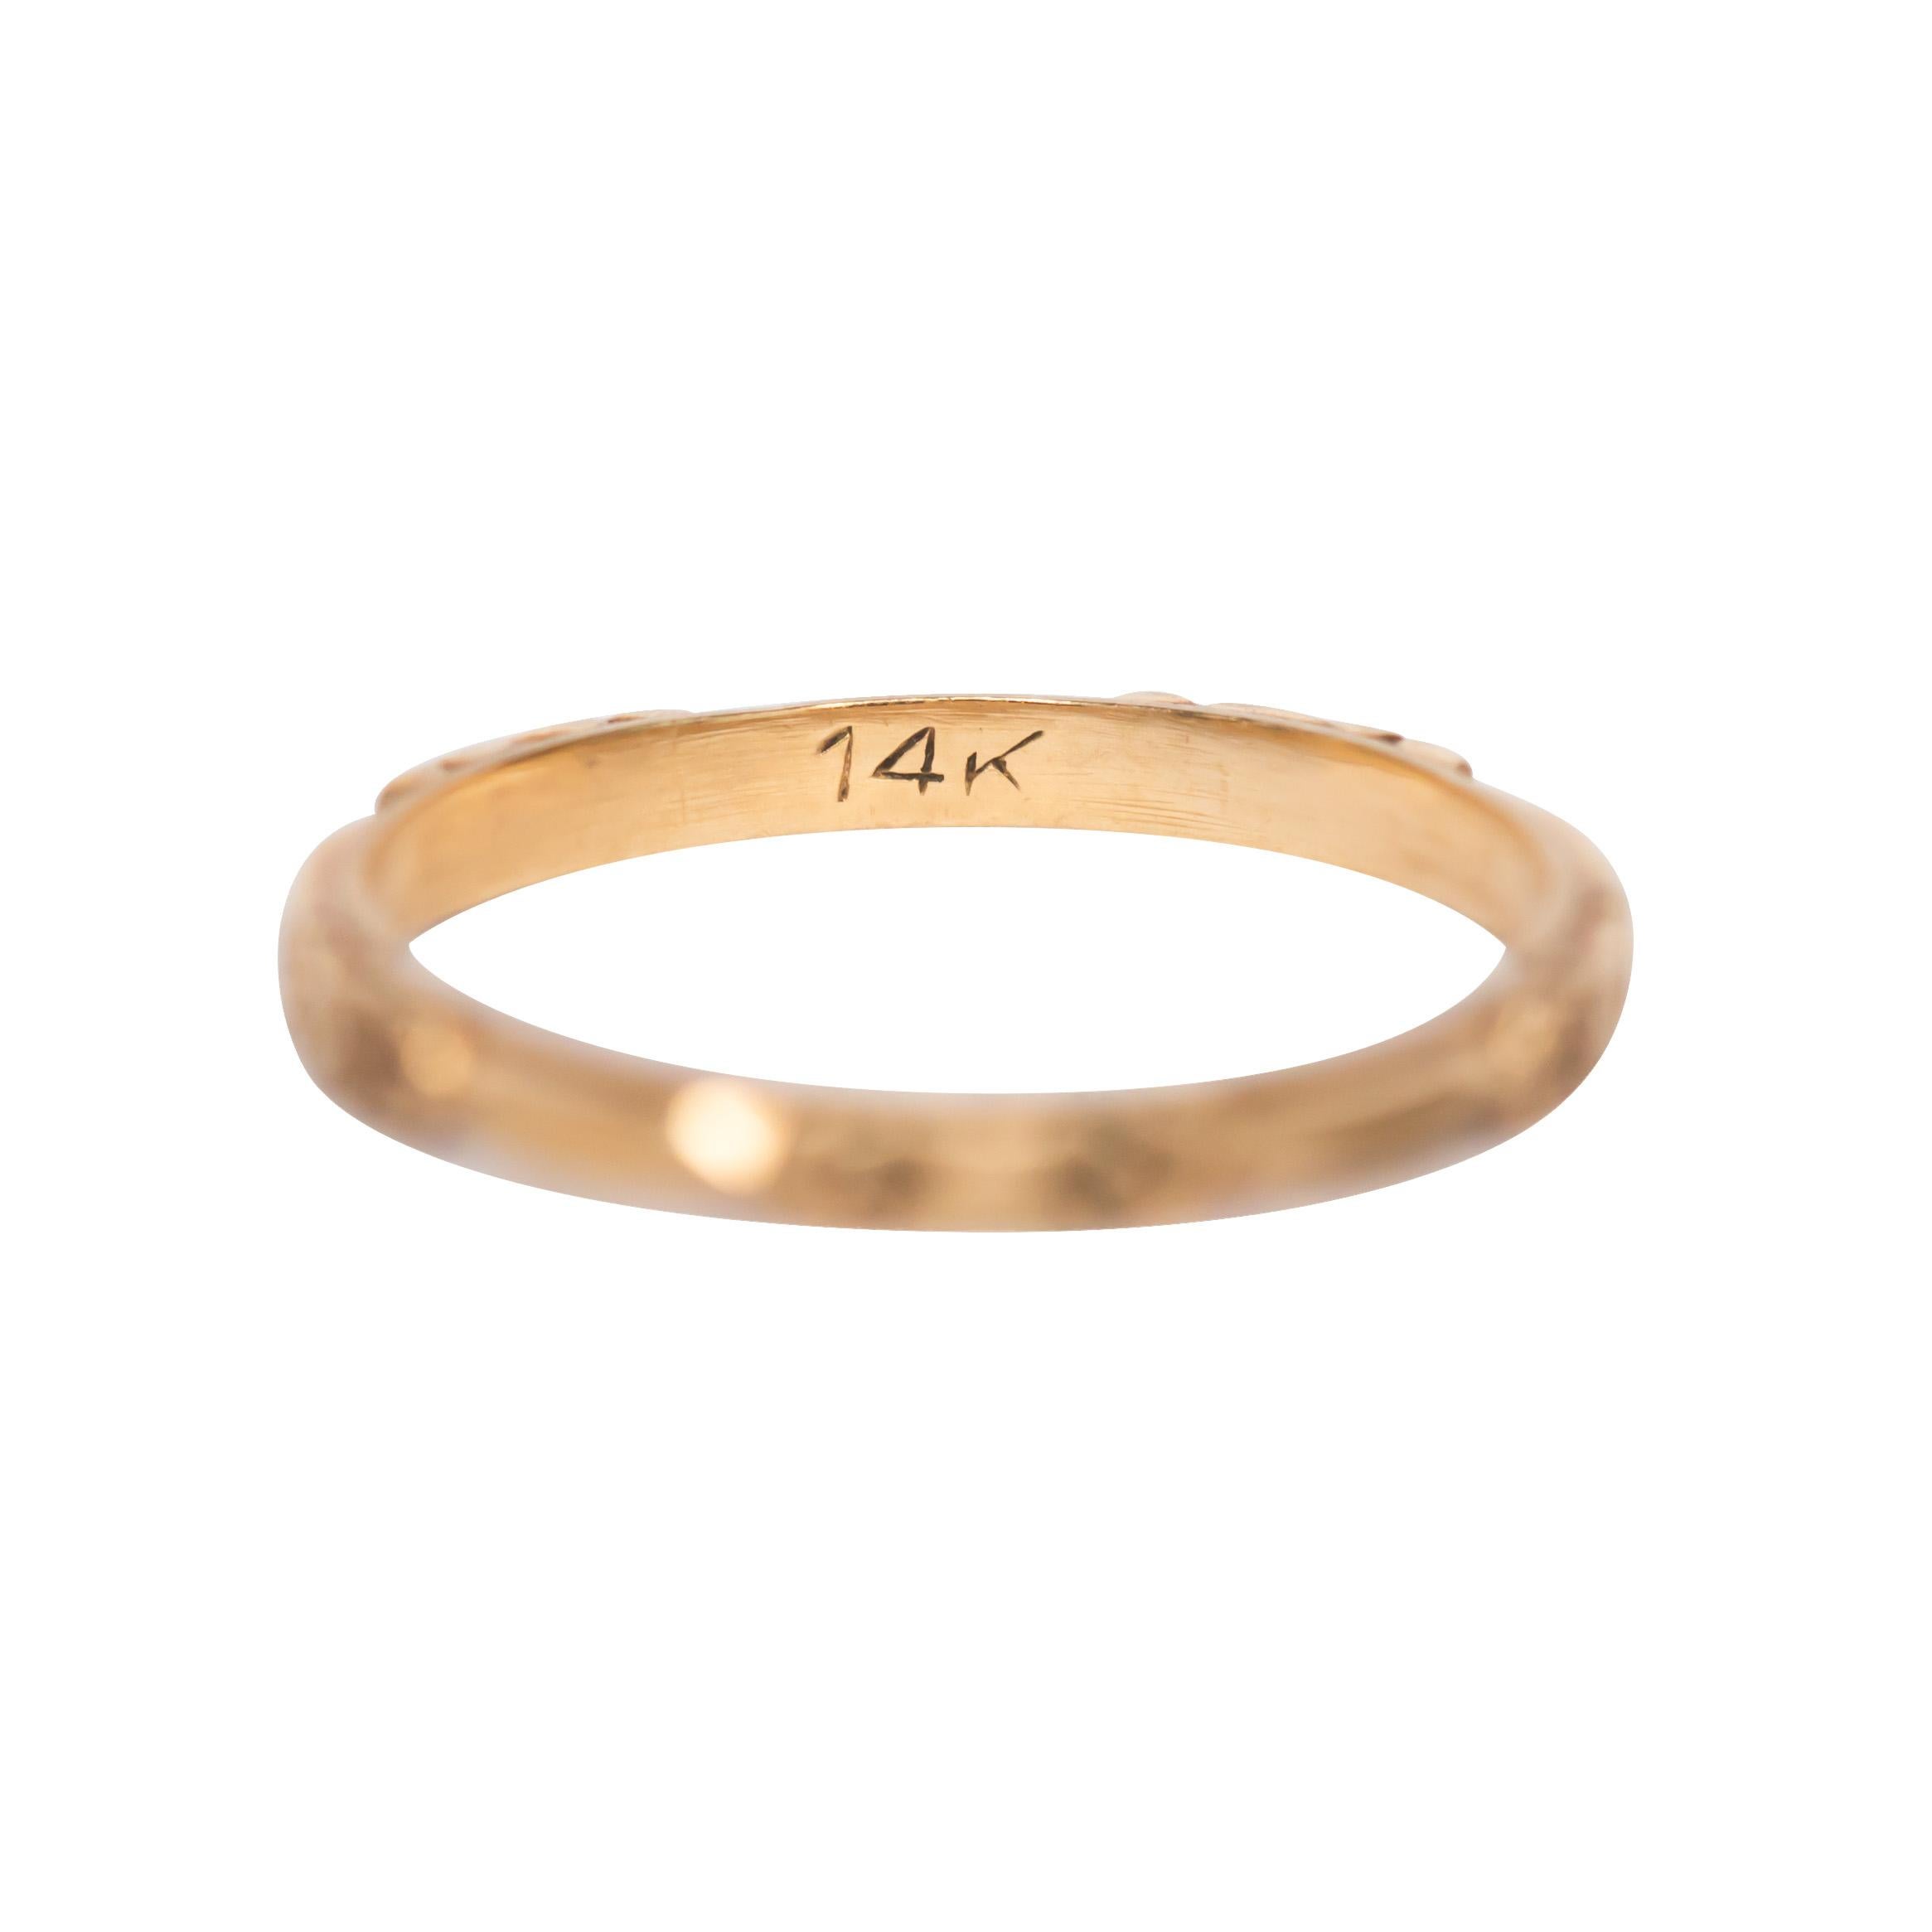 Ring Size: 7.90
Metal Type: 14 karat Yellow Gold 
Weight: 1.8 grams


Finger to Top of Stone Measurement: 1.55mm
Width: 2.22mm
